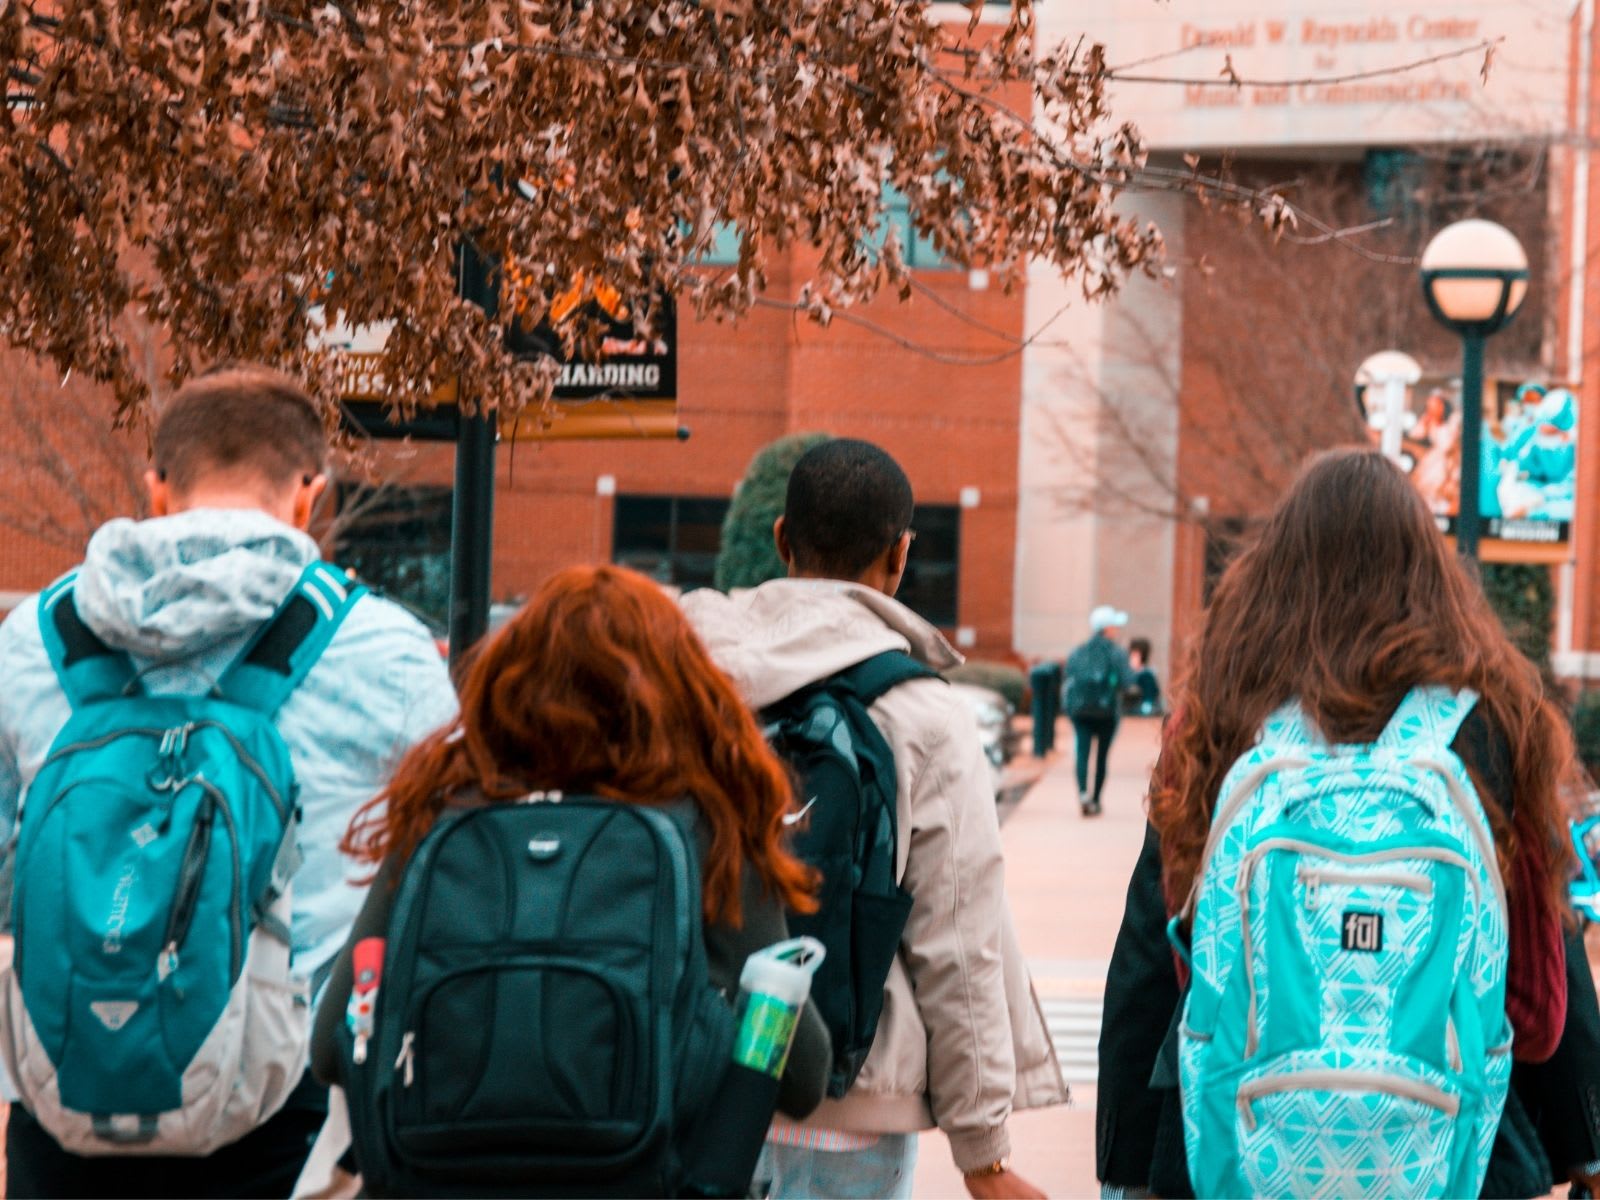 A group of students walking together